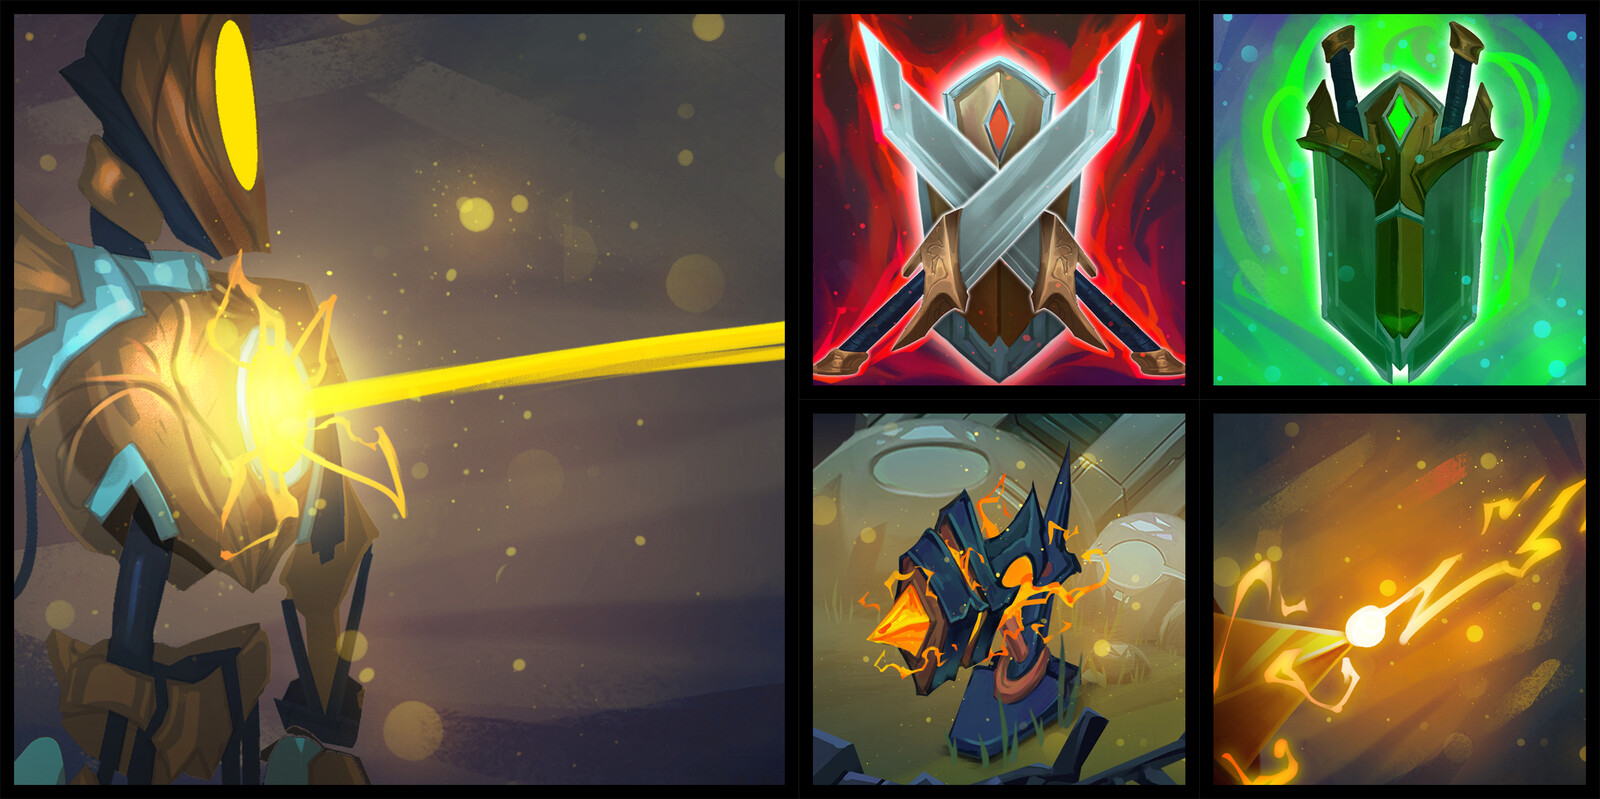 All of these unused artworks have been changed due to gameplay changes that happened during development